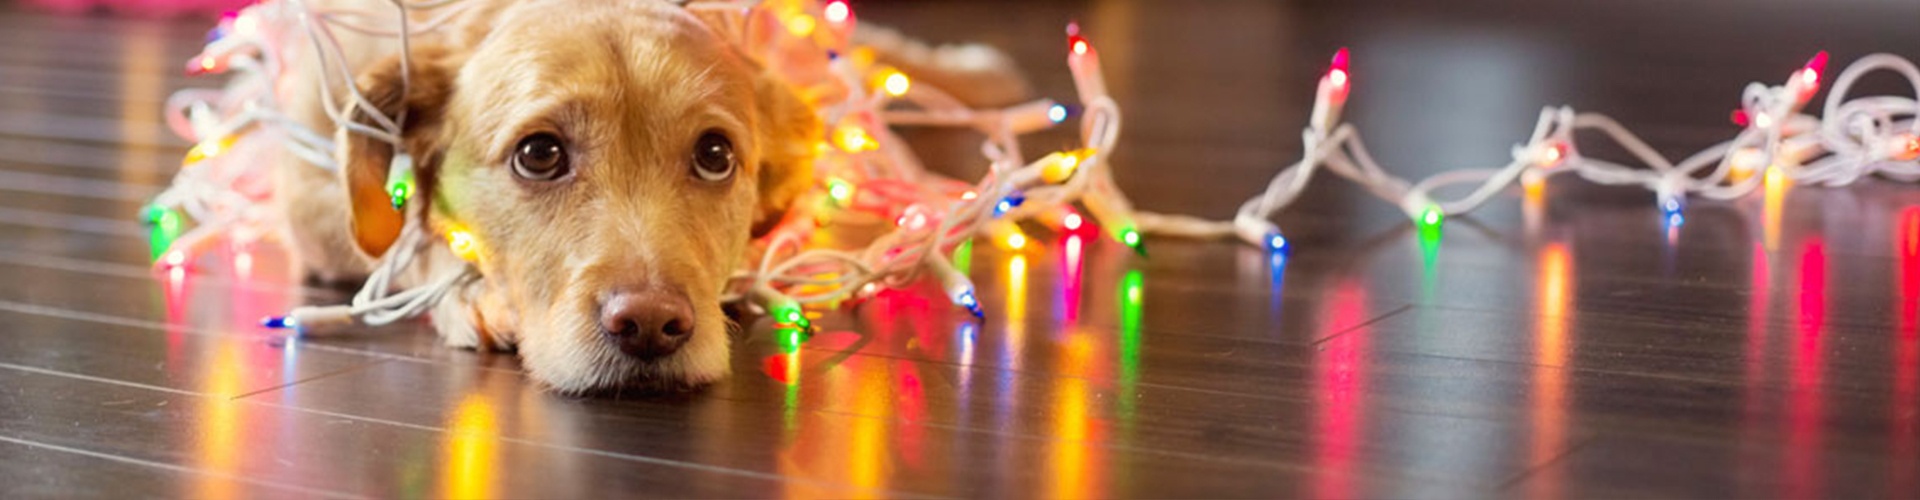 Pet-Friendly Holiday Decorating Tips